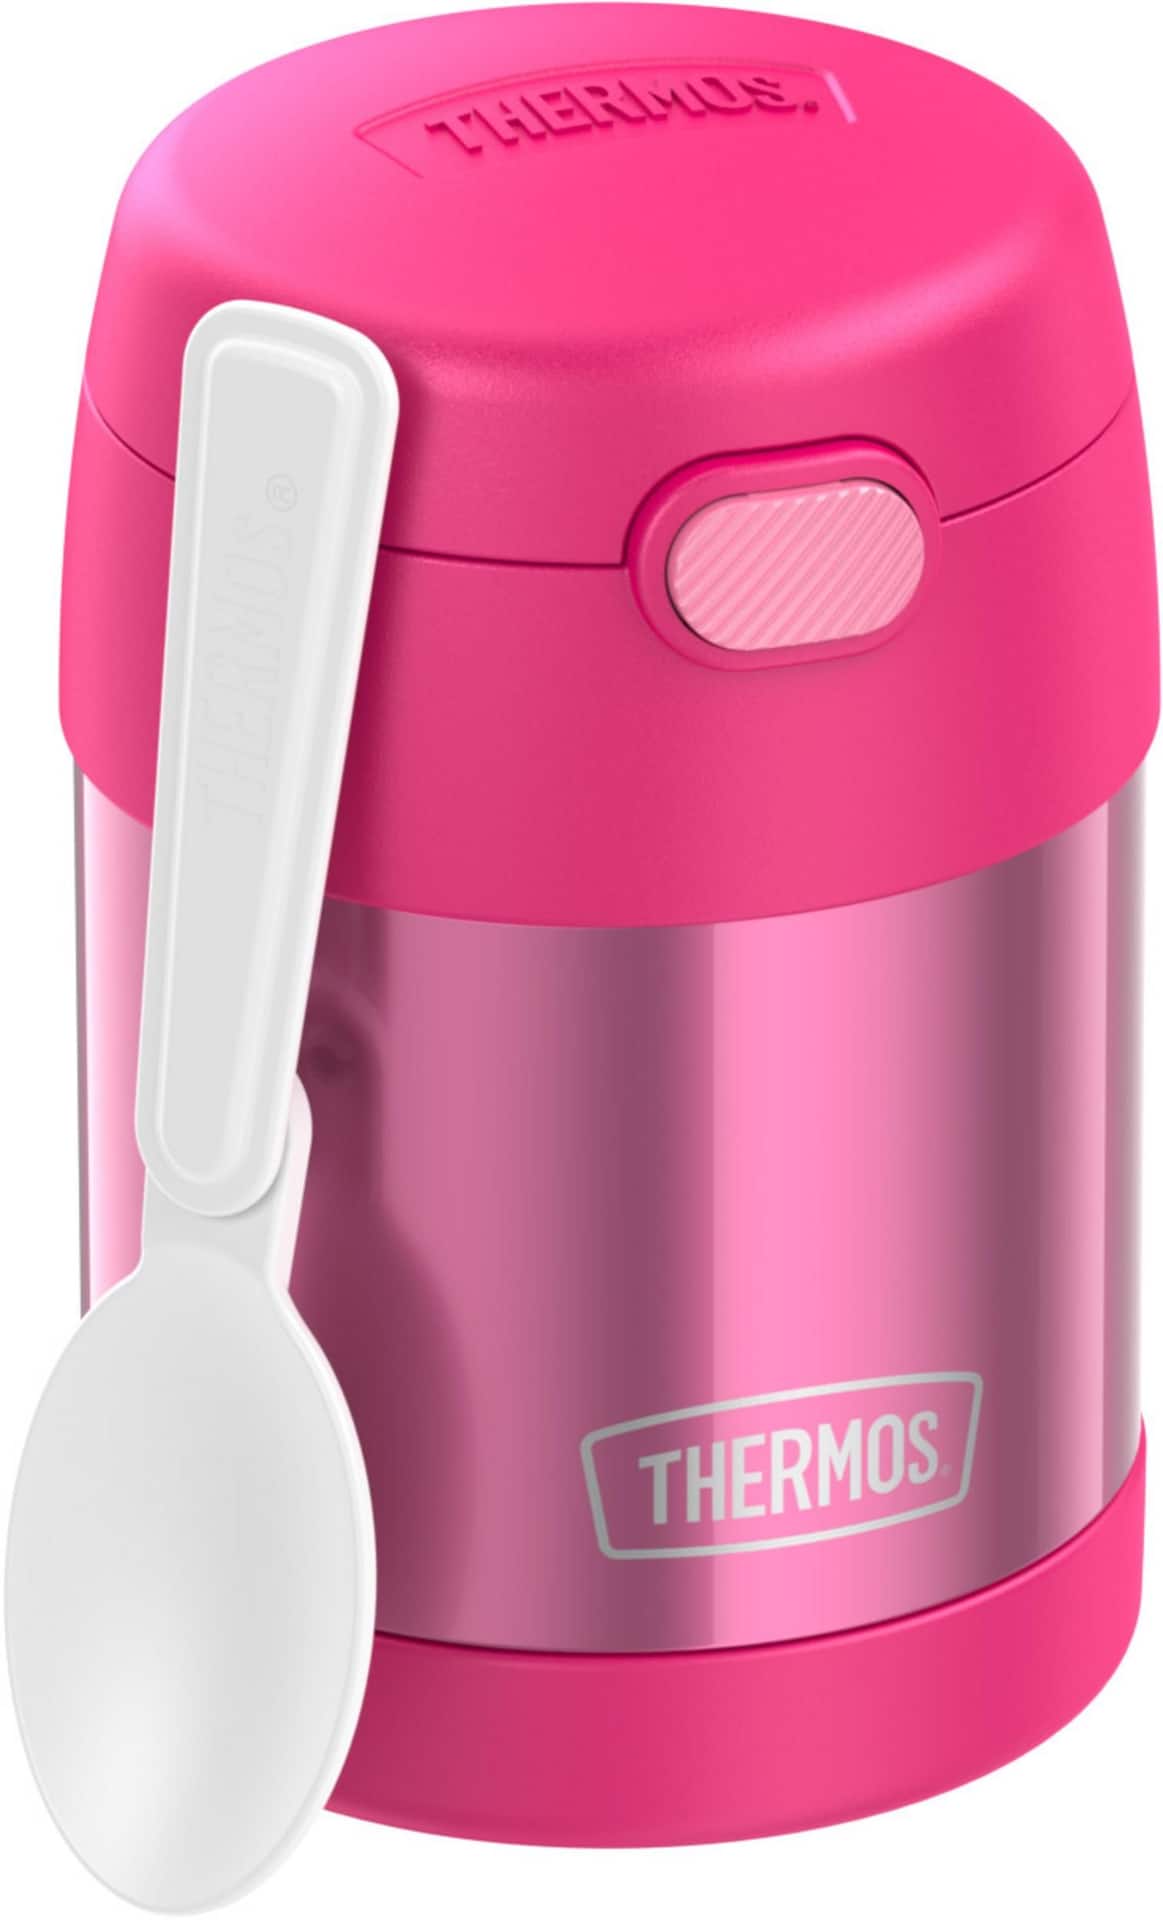 Thermos® Stainless Steel Food Jar Vaccum Insulated with Spoon, Pink, 295-mL